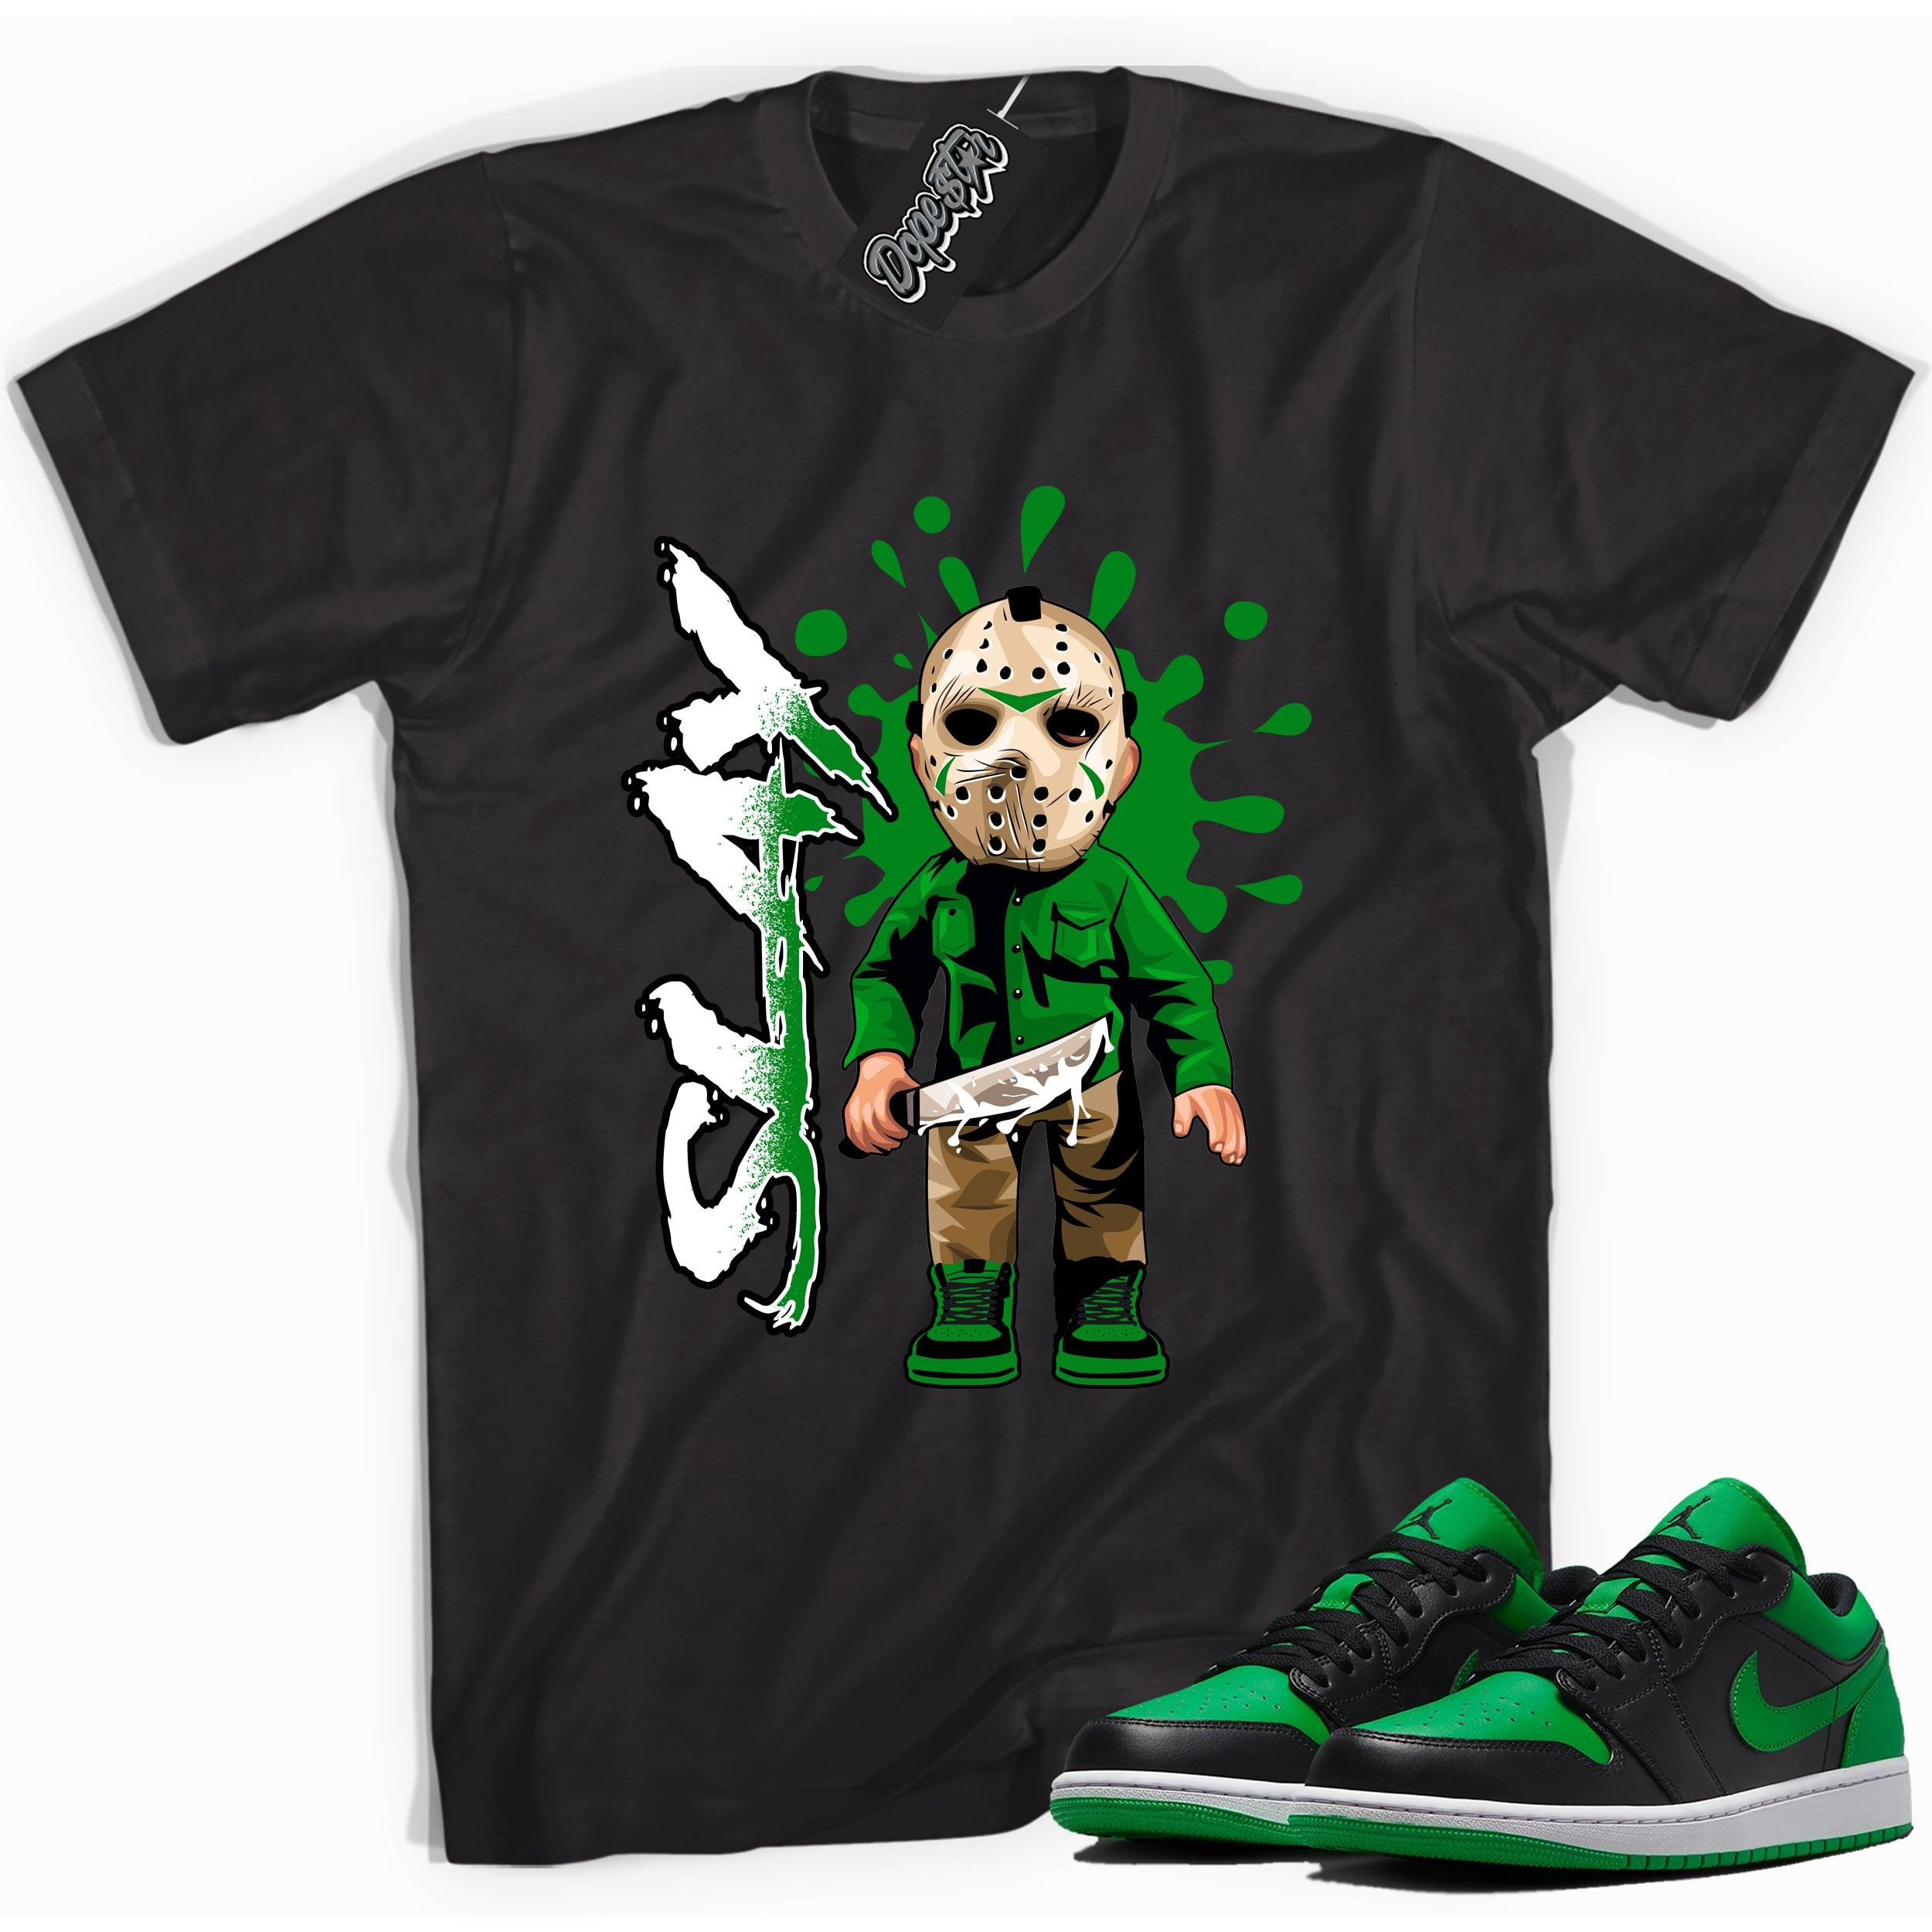 Cool black graphic tee with 'slay' print, that perfectly matches Air Jordan 1 Low Lucky Green sneakers